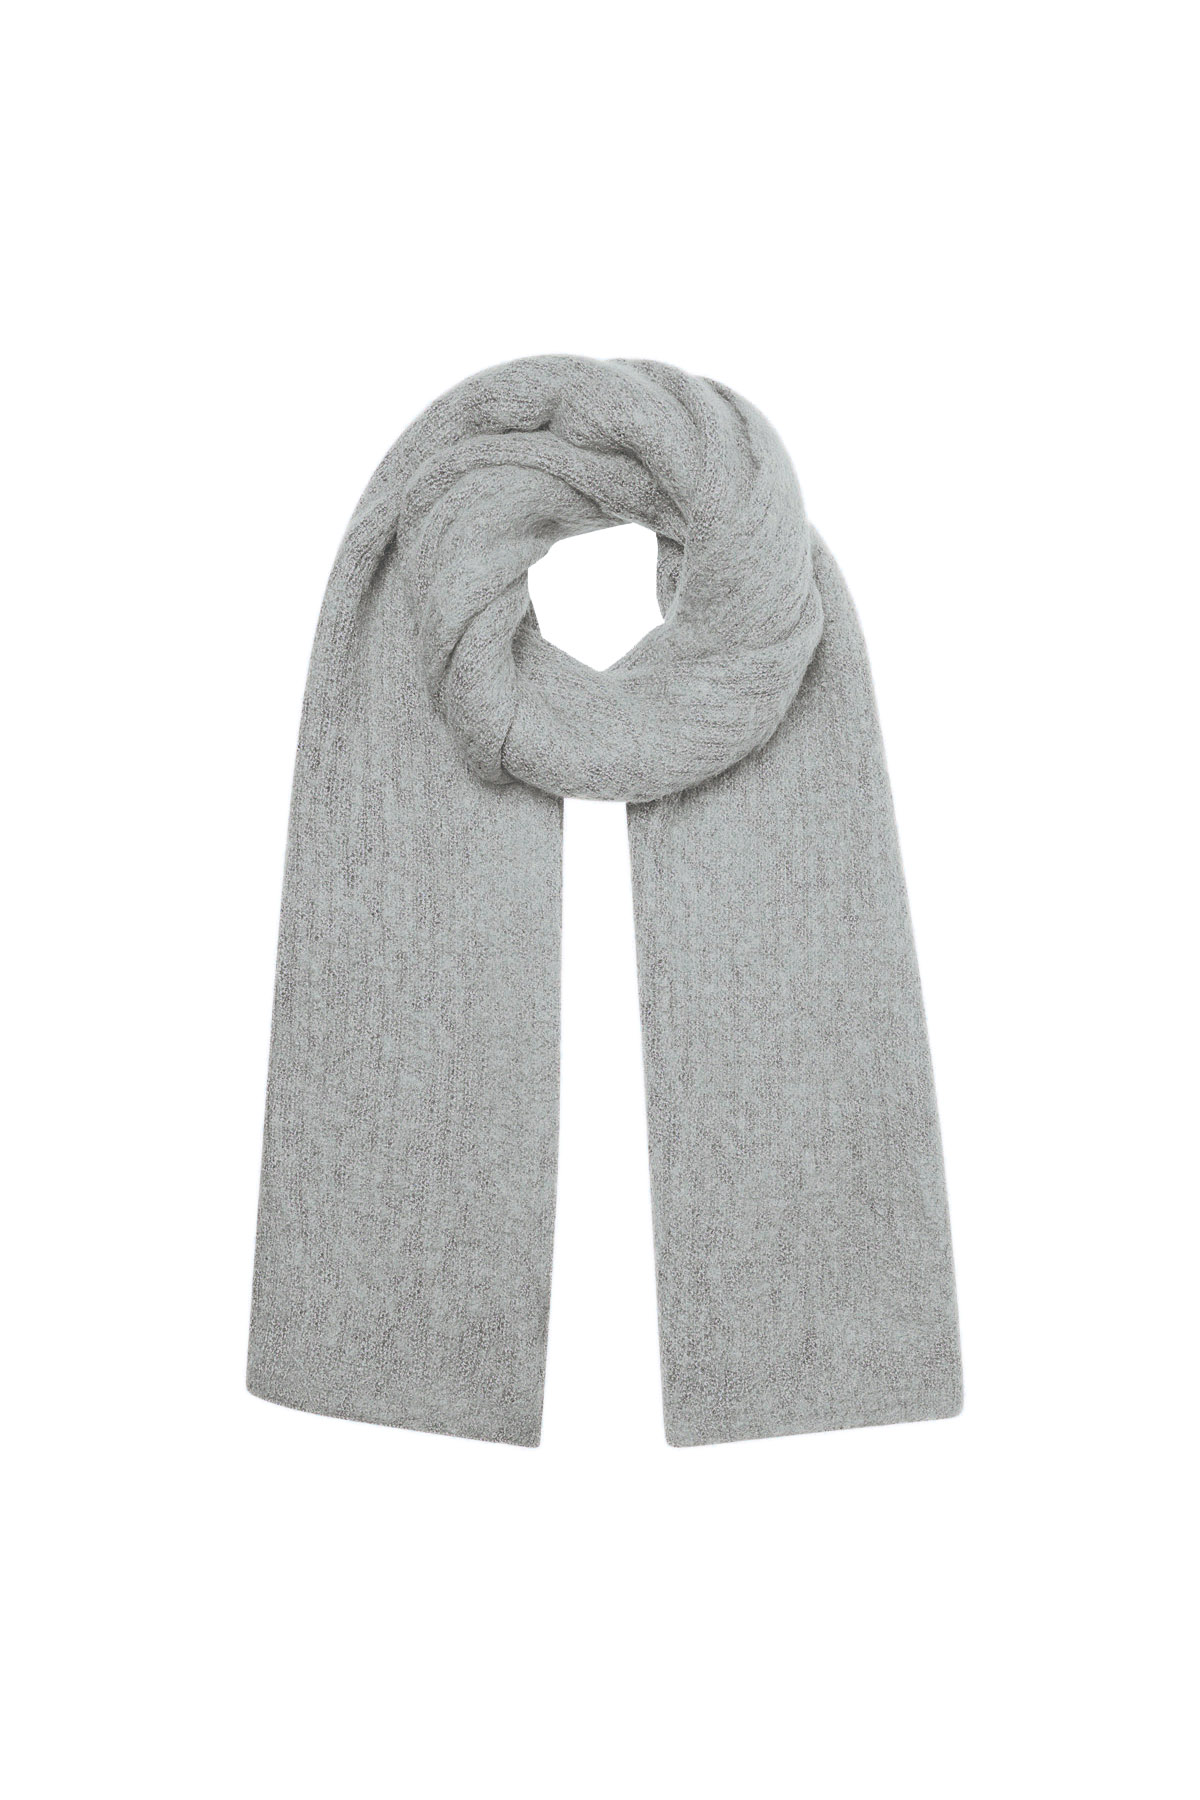 Scarf knitted plain - grey 